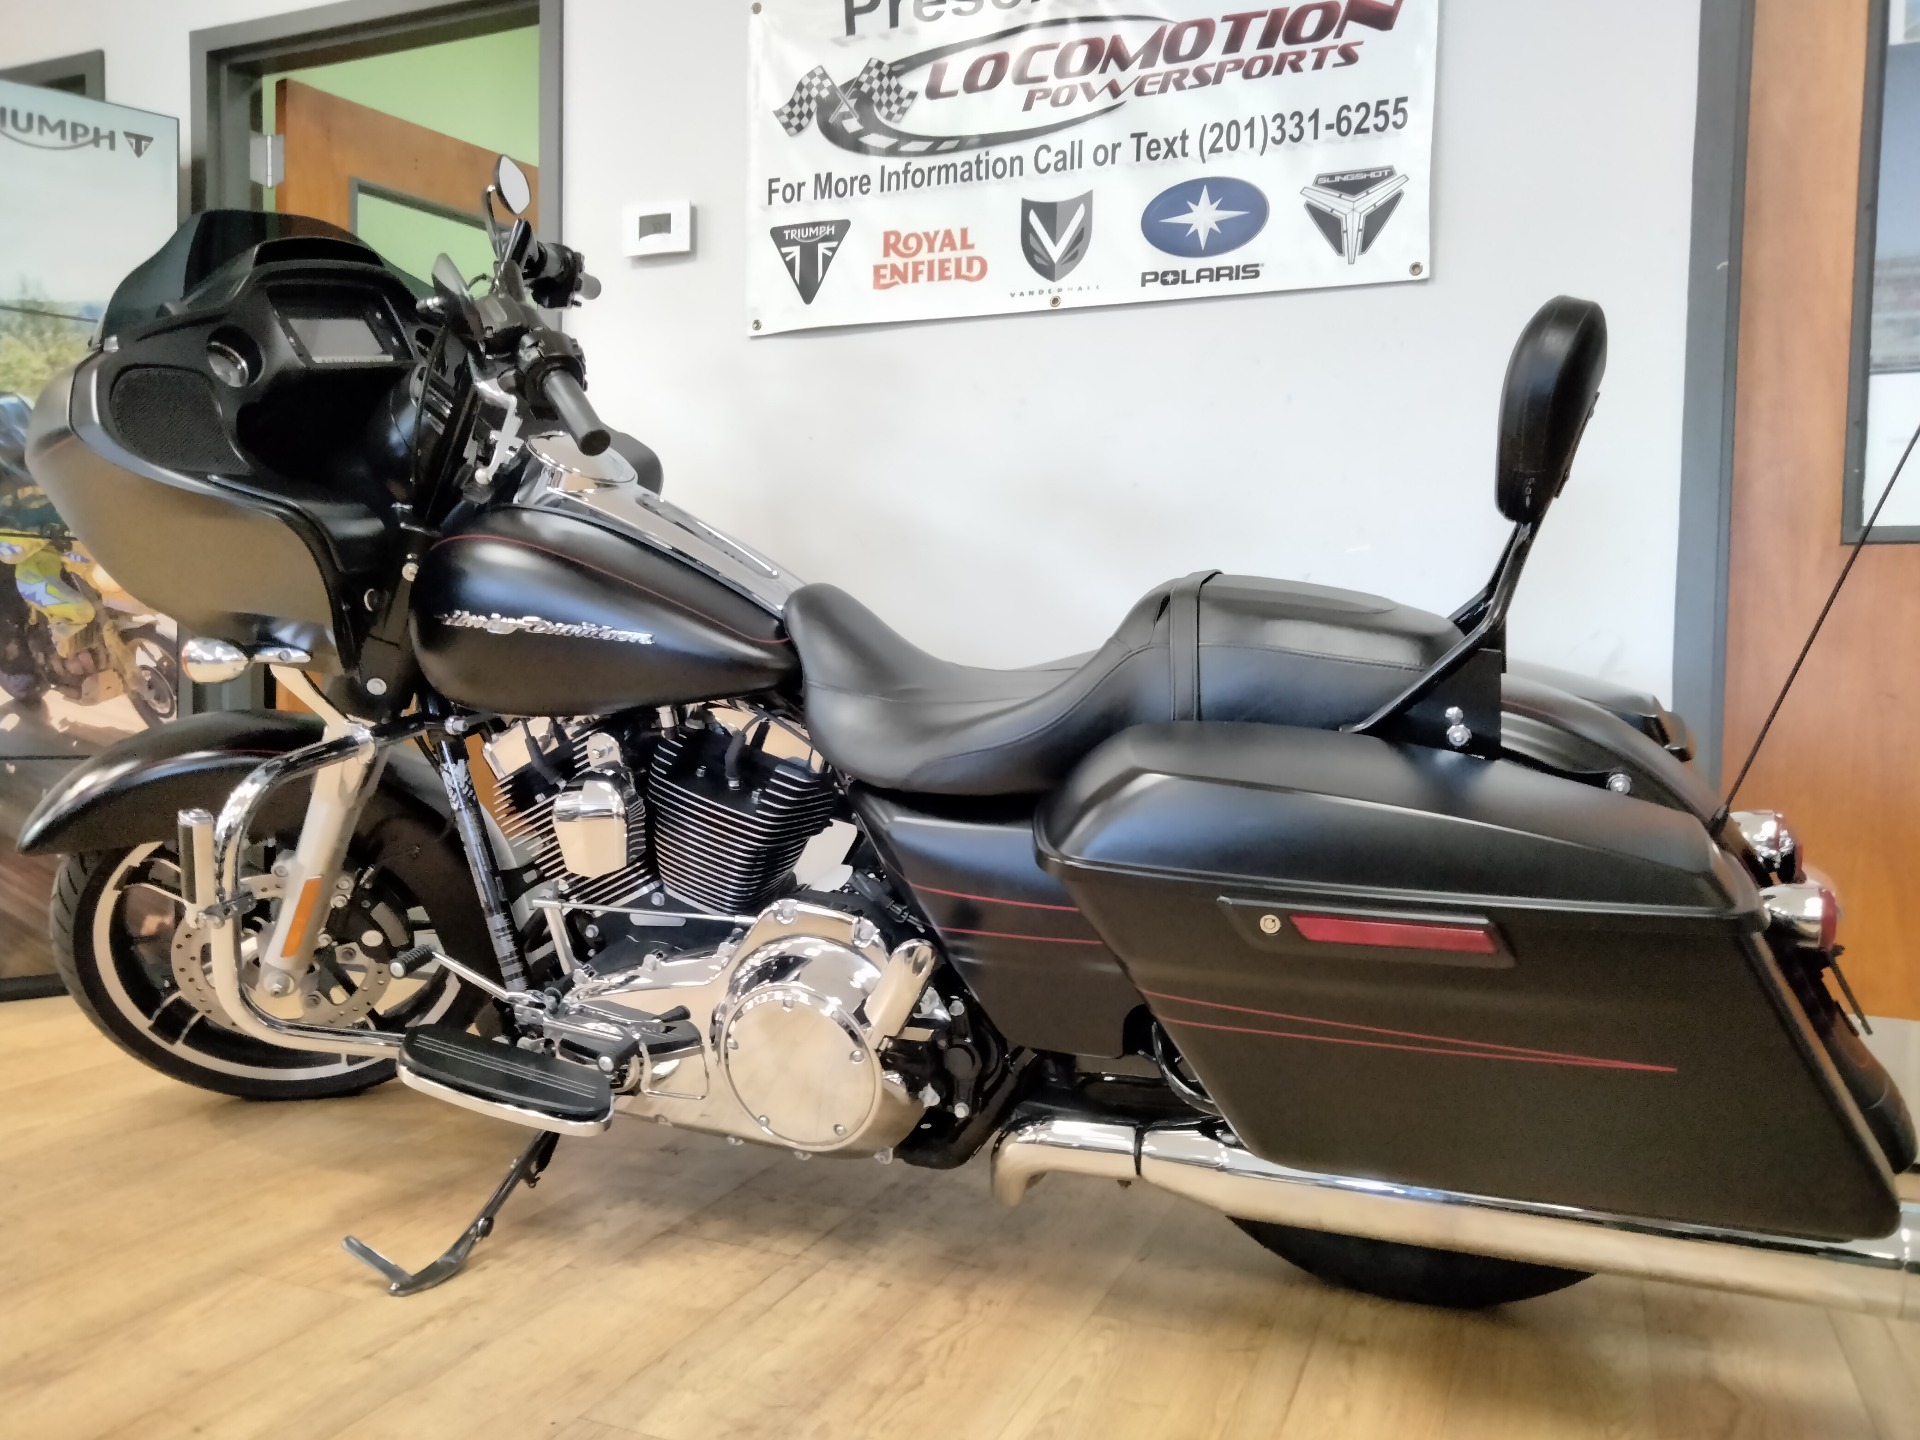 2015 Harley-Davidson Road Glide® Special in Mahwah, New Jersey - Photo 4